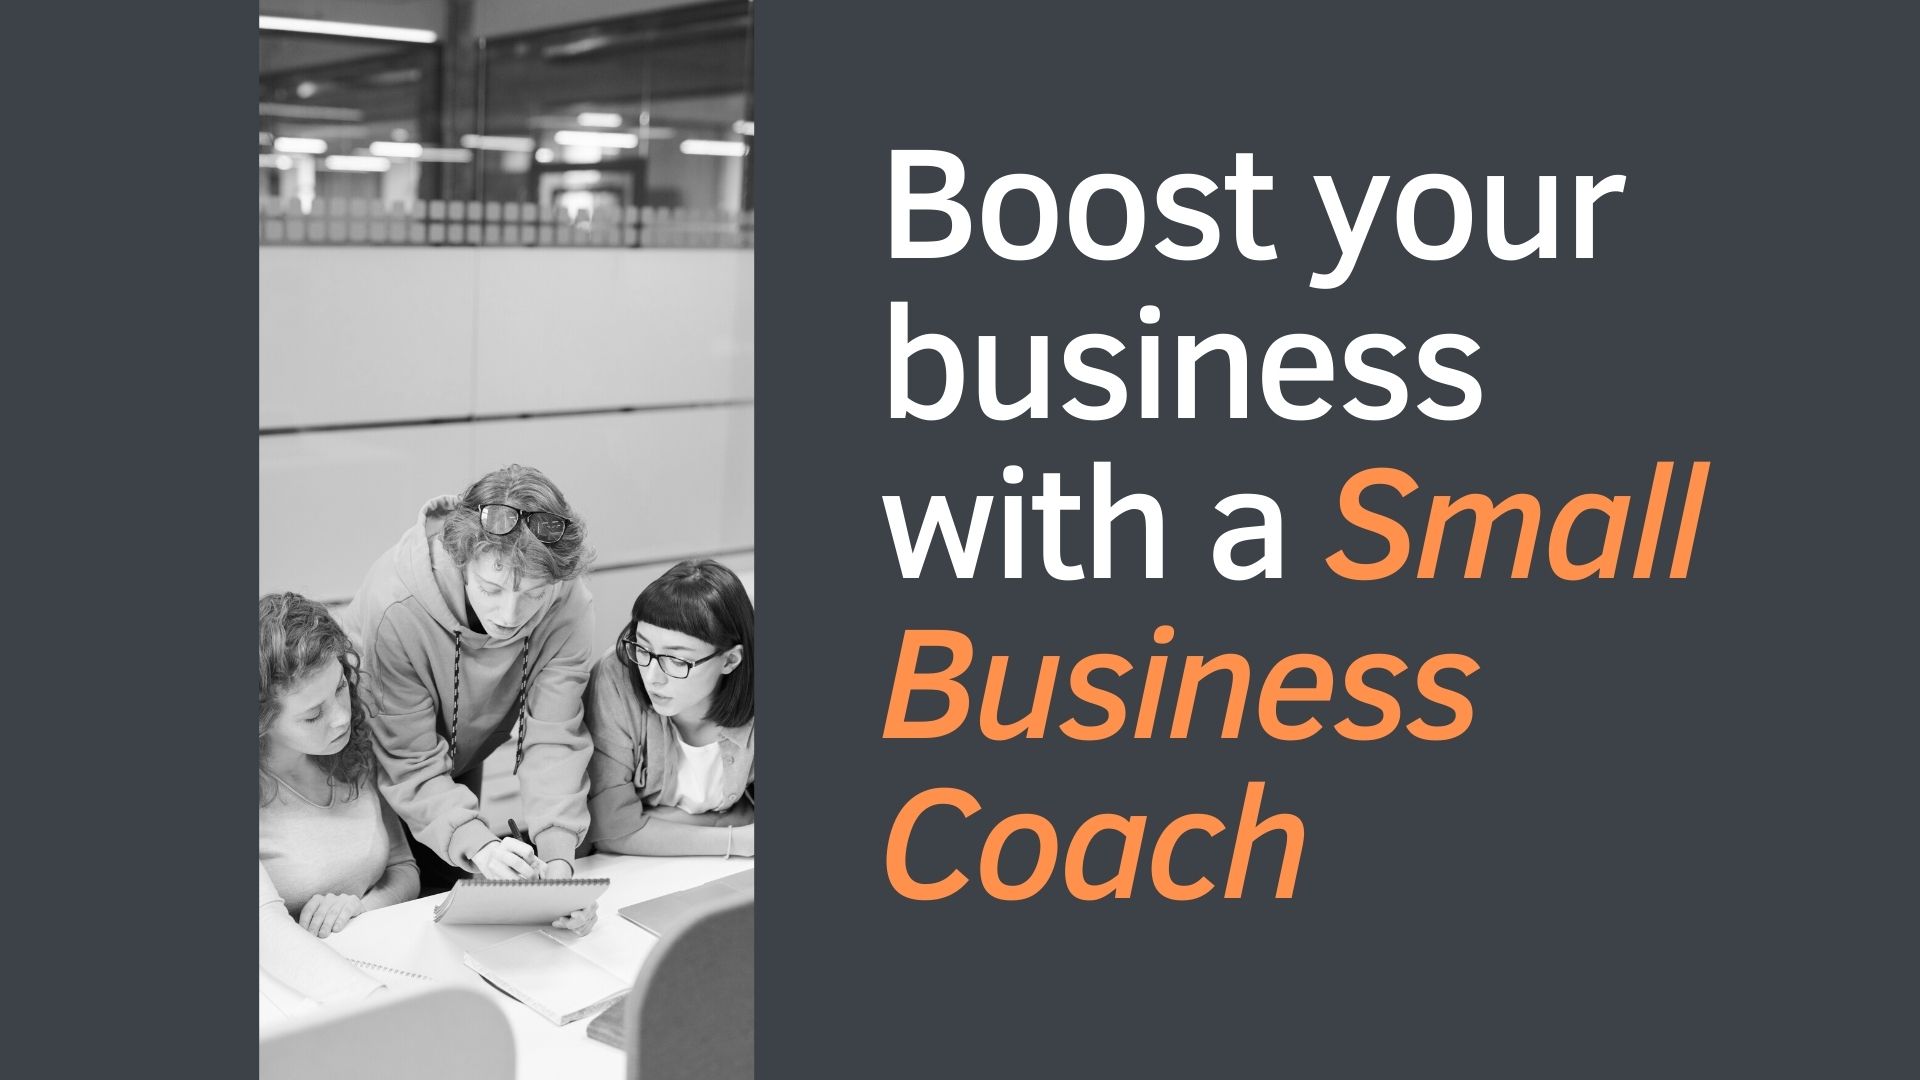 Boost your business with a Small Business Coach